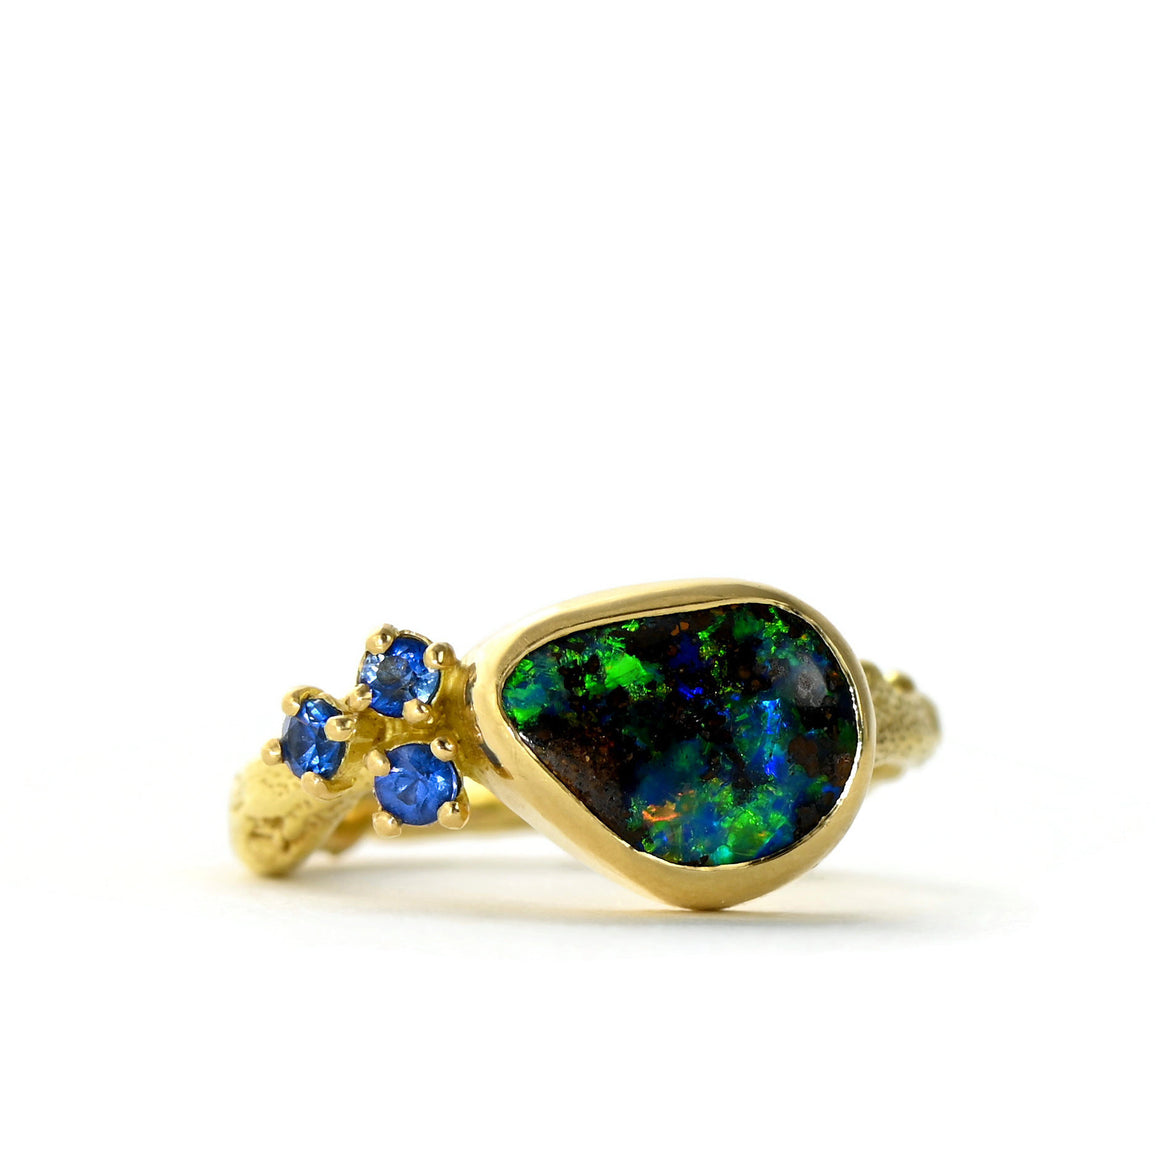 Australian opal and sapphires cluster ring - one of a kind solid gold ring design